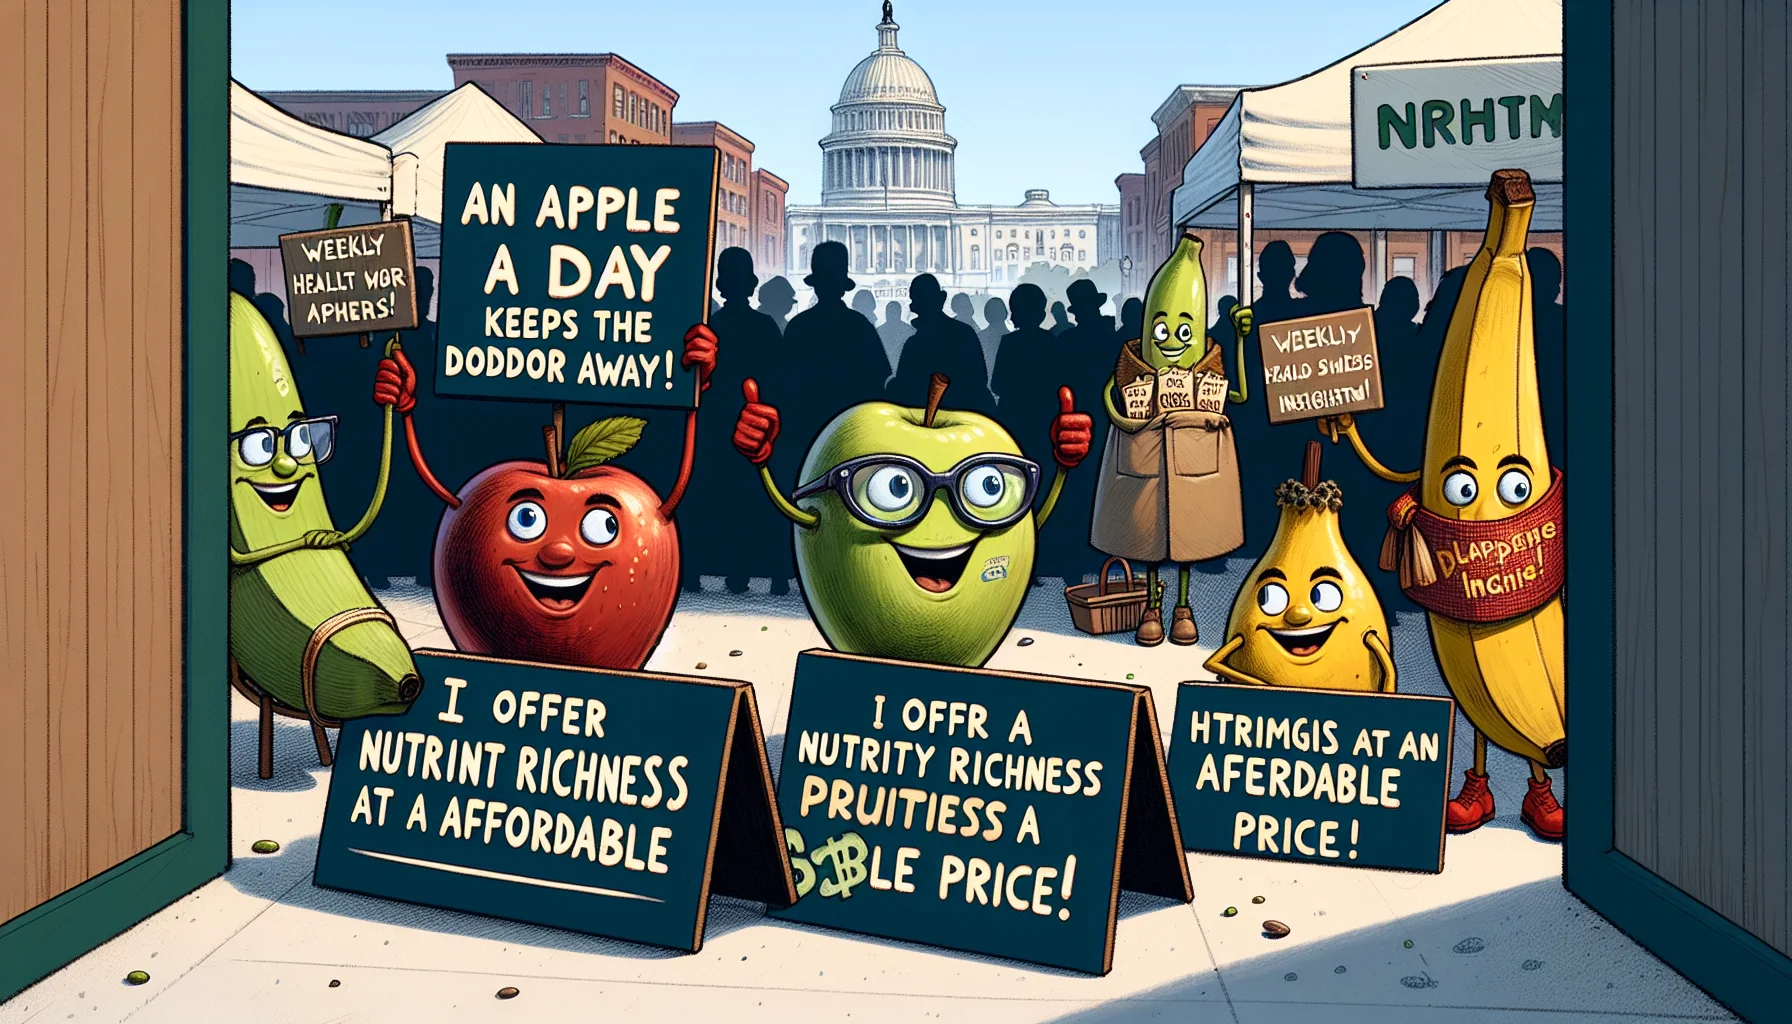 Imagine an amusing yet practical scenario illustrating the concept of 'Weekly Health and Wellness Insights.' Picture a scene where fruits and vegetables have been humorously anthropomorphized. They are at a farmers market, enthusiastically advertising their benefits with signs. The apple wearing glasses is stating 'An apple a day keeps the doctor away!' while a thrifty banana wearing a sash is declaring, 'I offer nutrient richness at an affordable price!' The intent is to entice observers to eat healthier without breaking their budget.